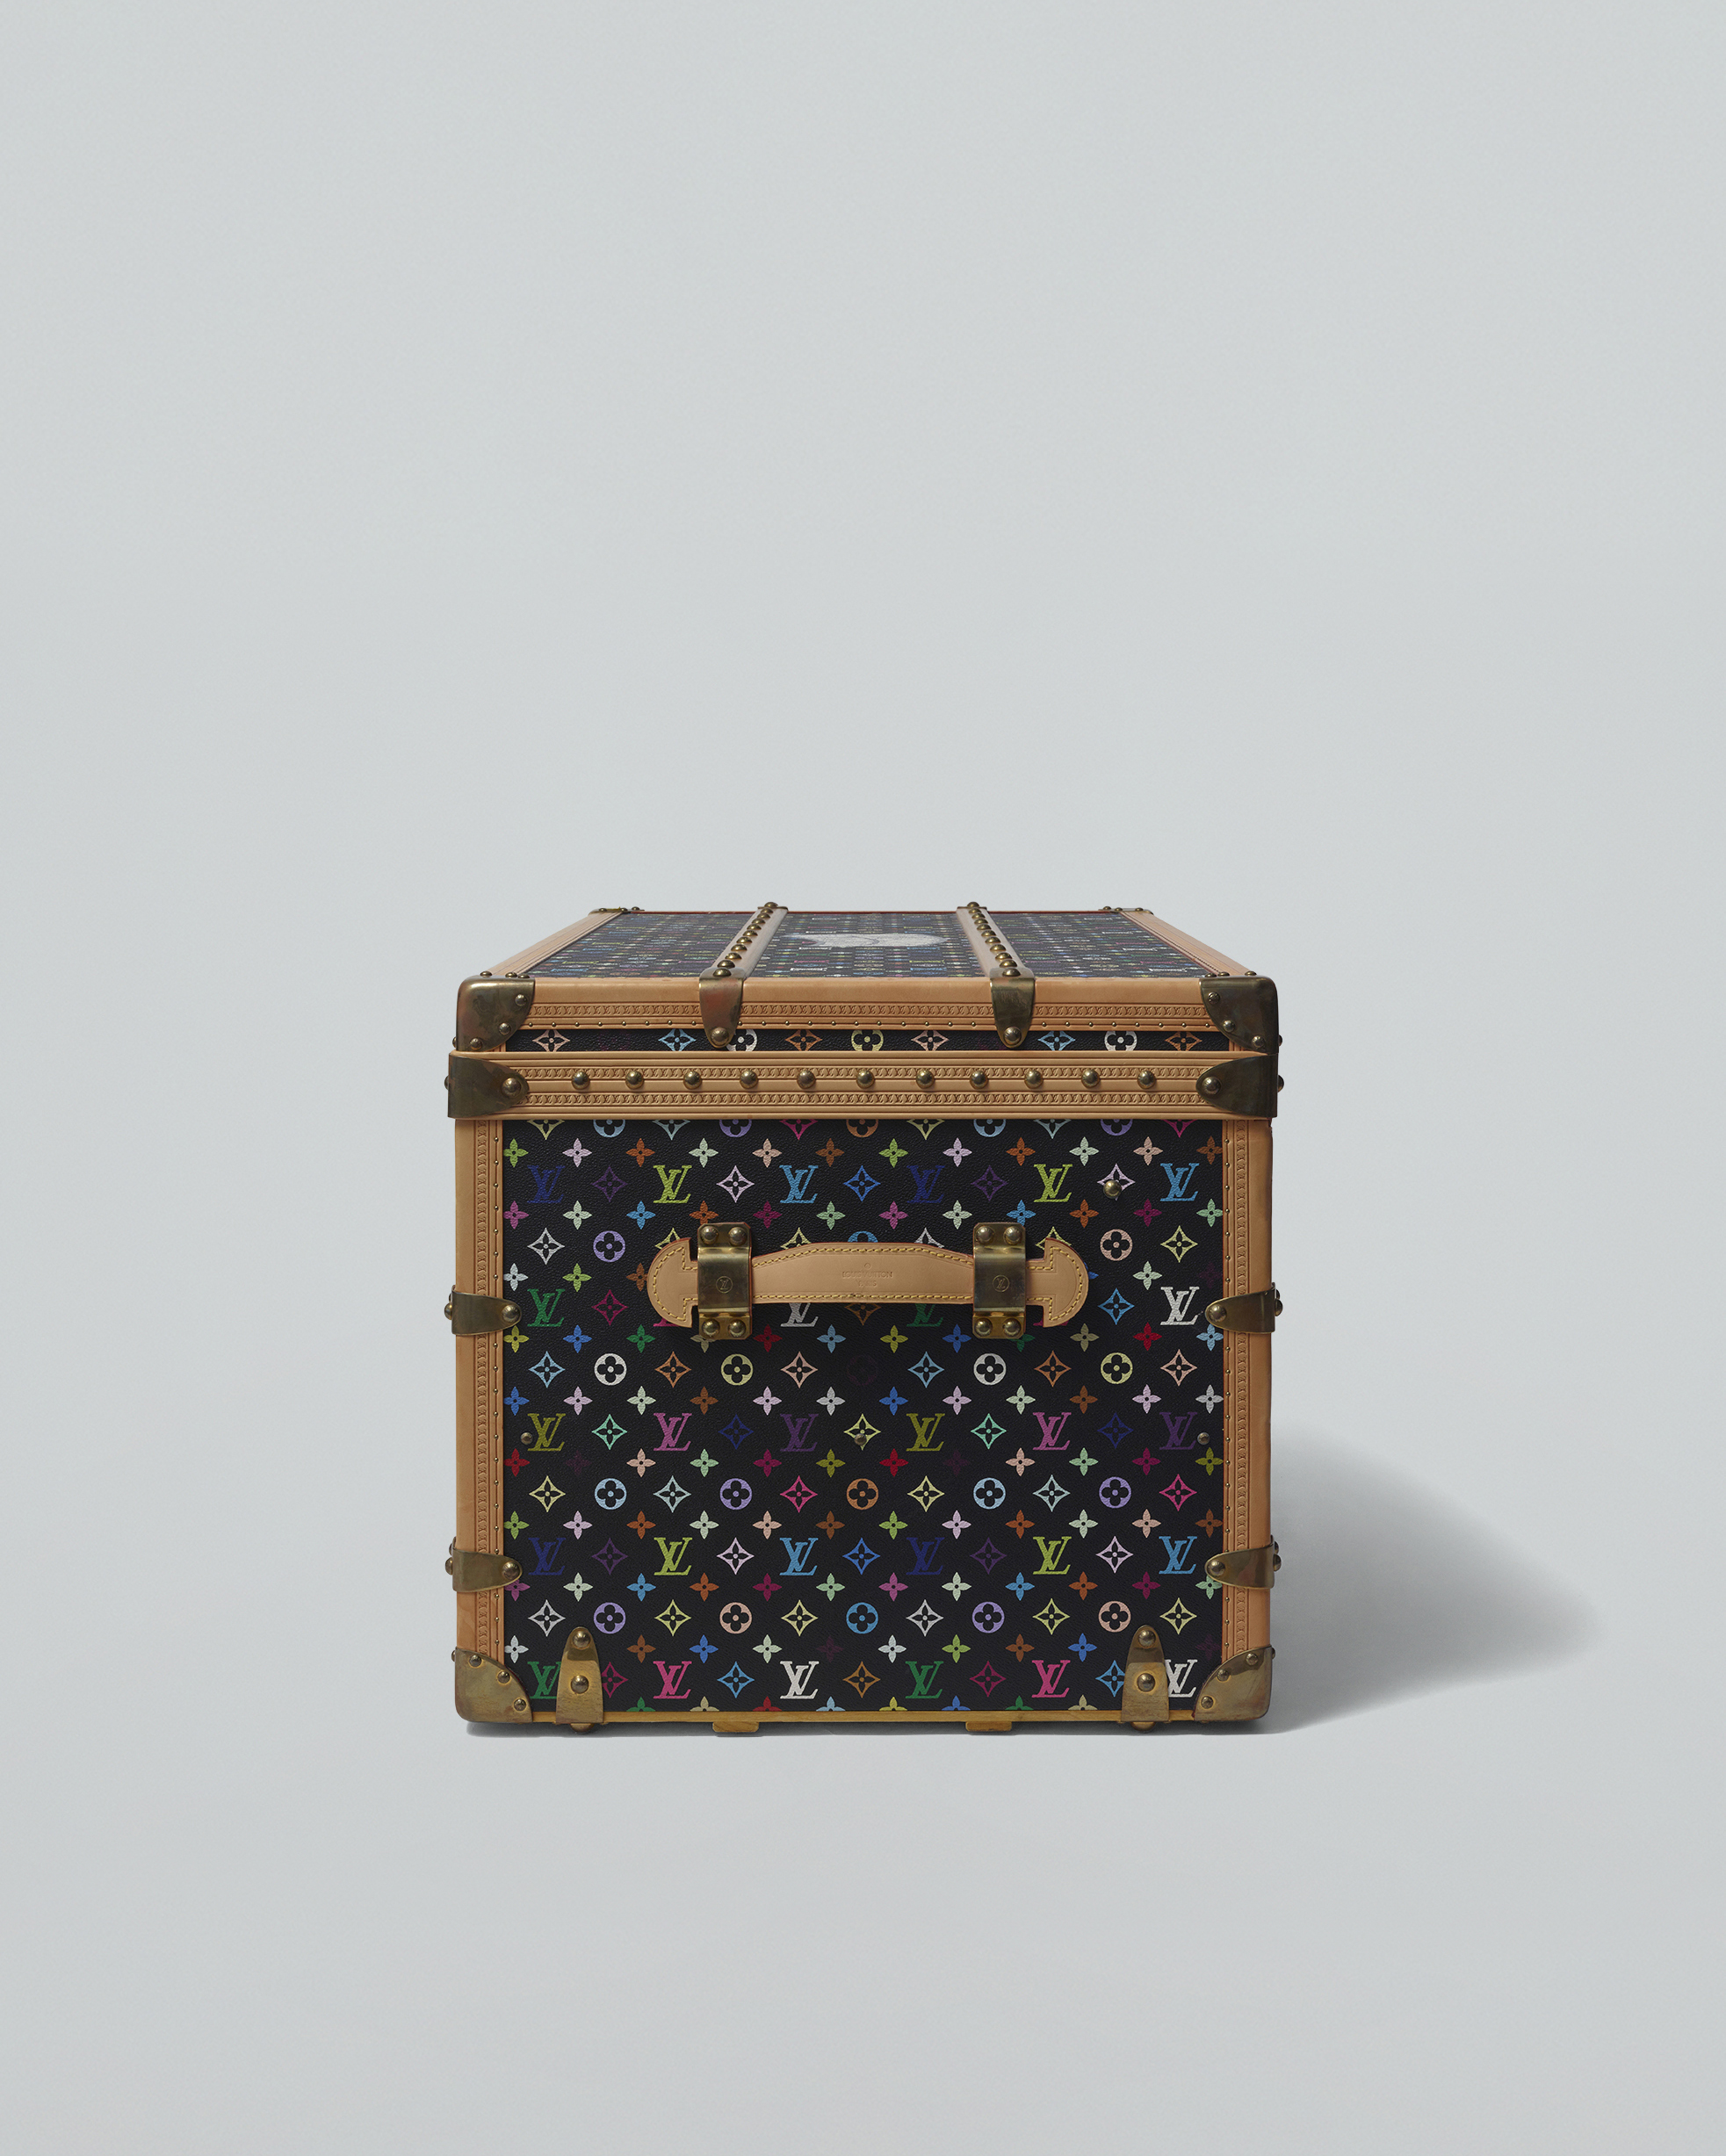 For the Louis Vuitton and Pharrell Williams VIA Treasure Trunk